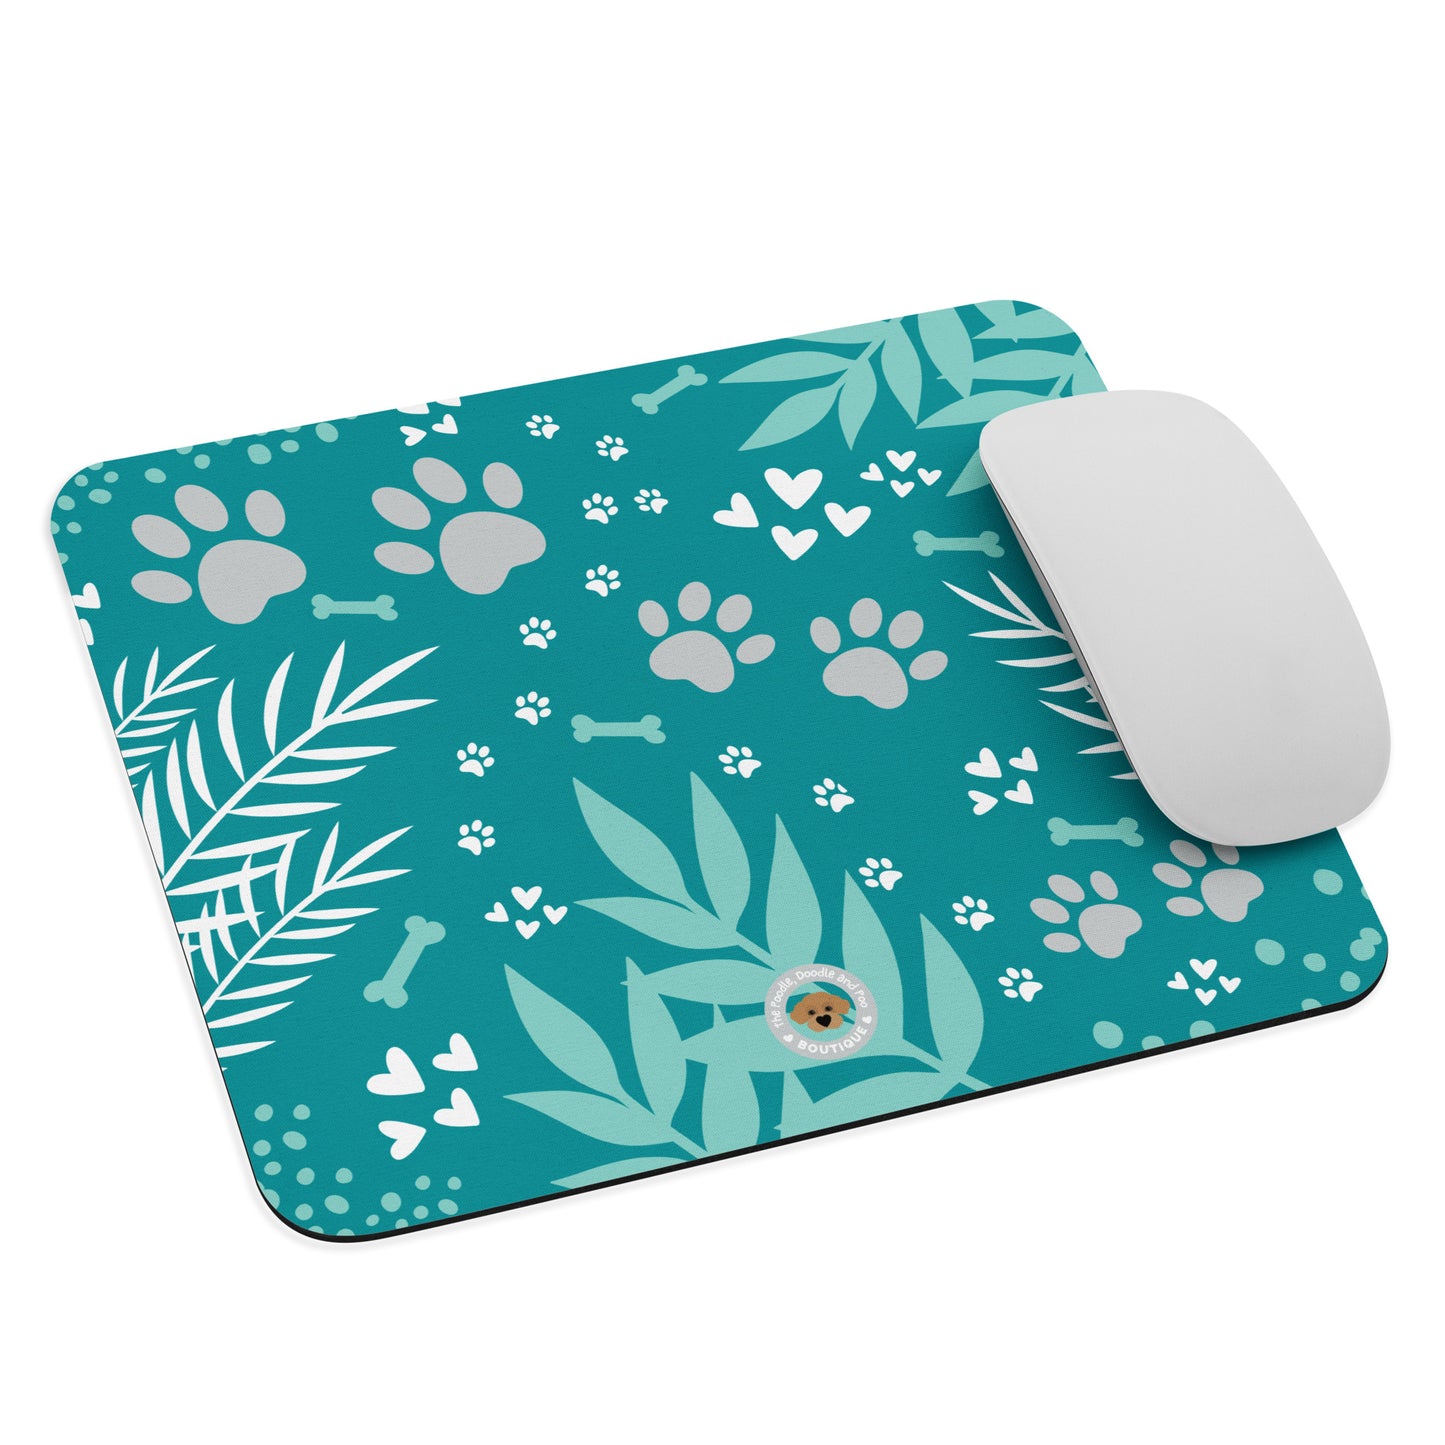 Signature Collection Mouse pad - teal